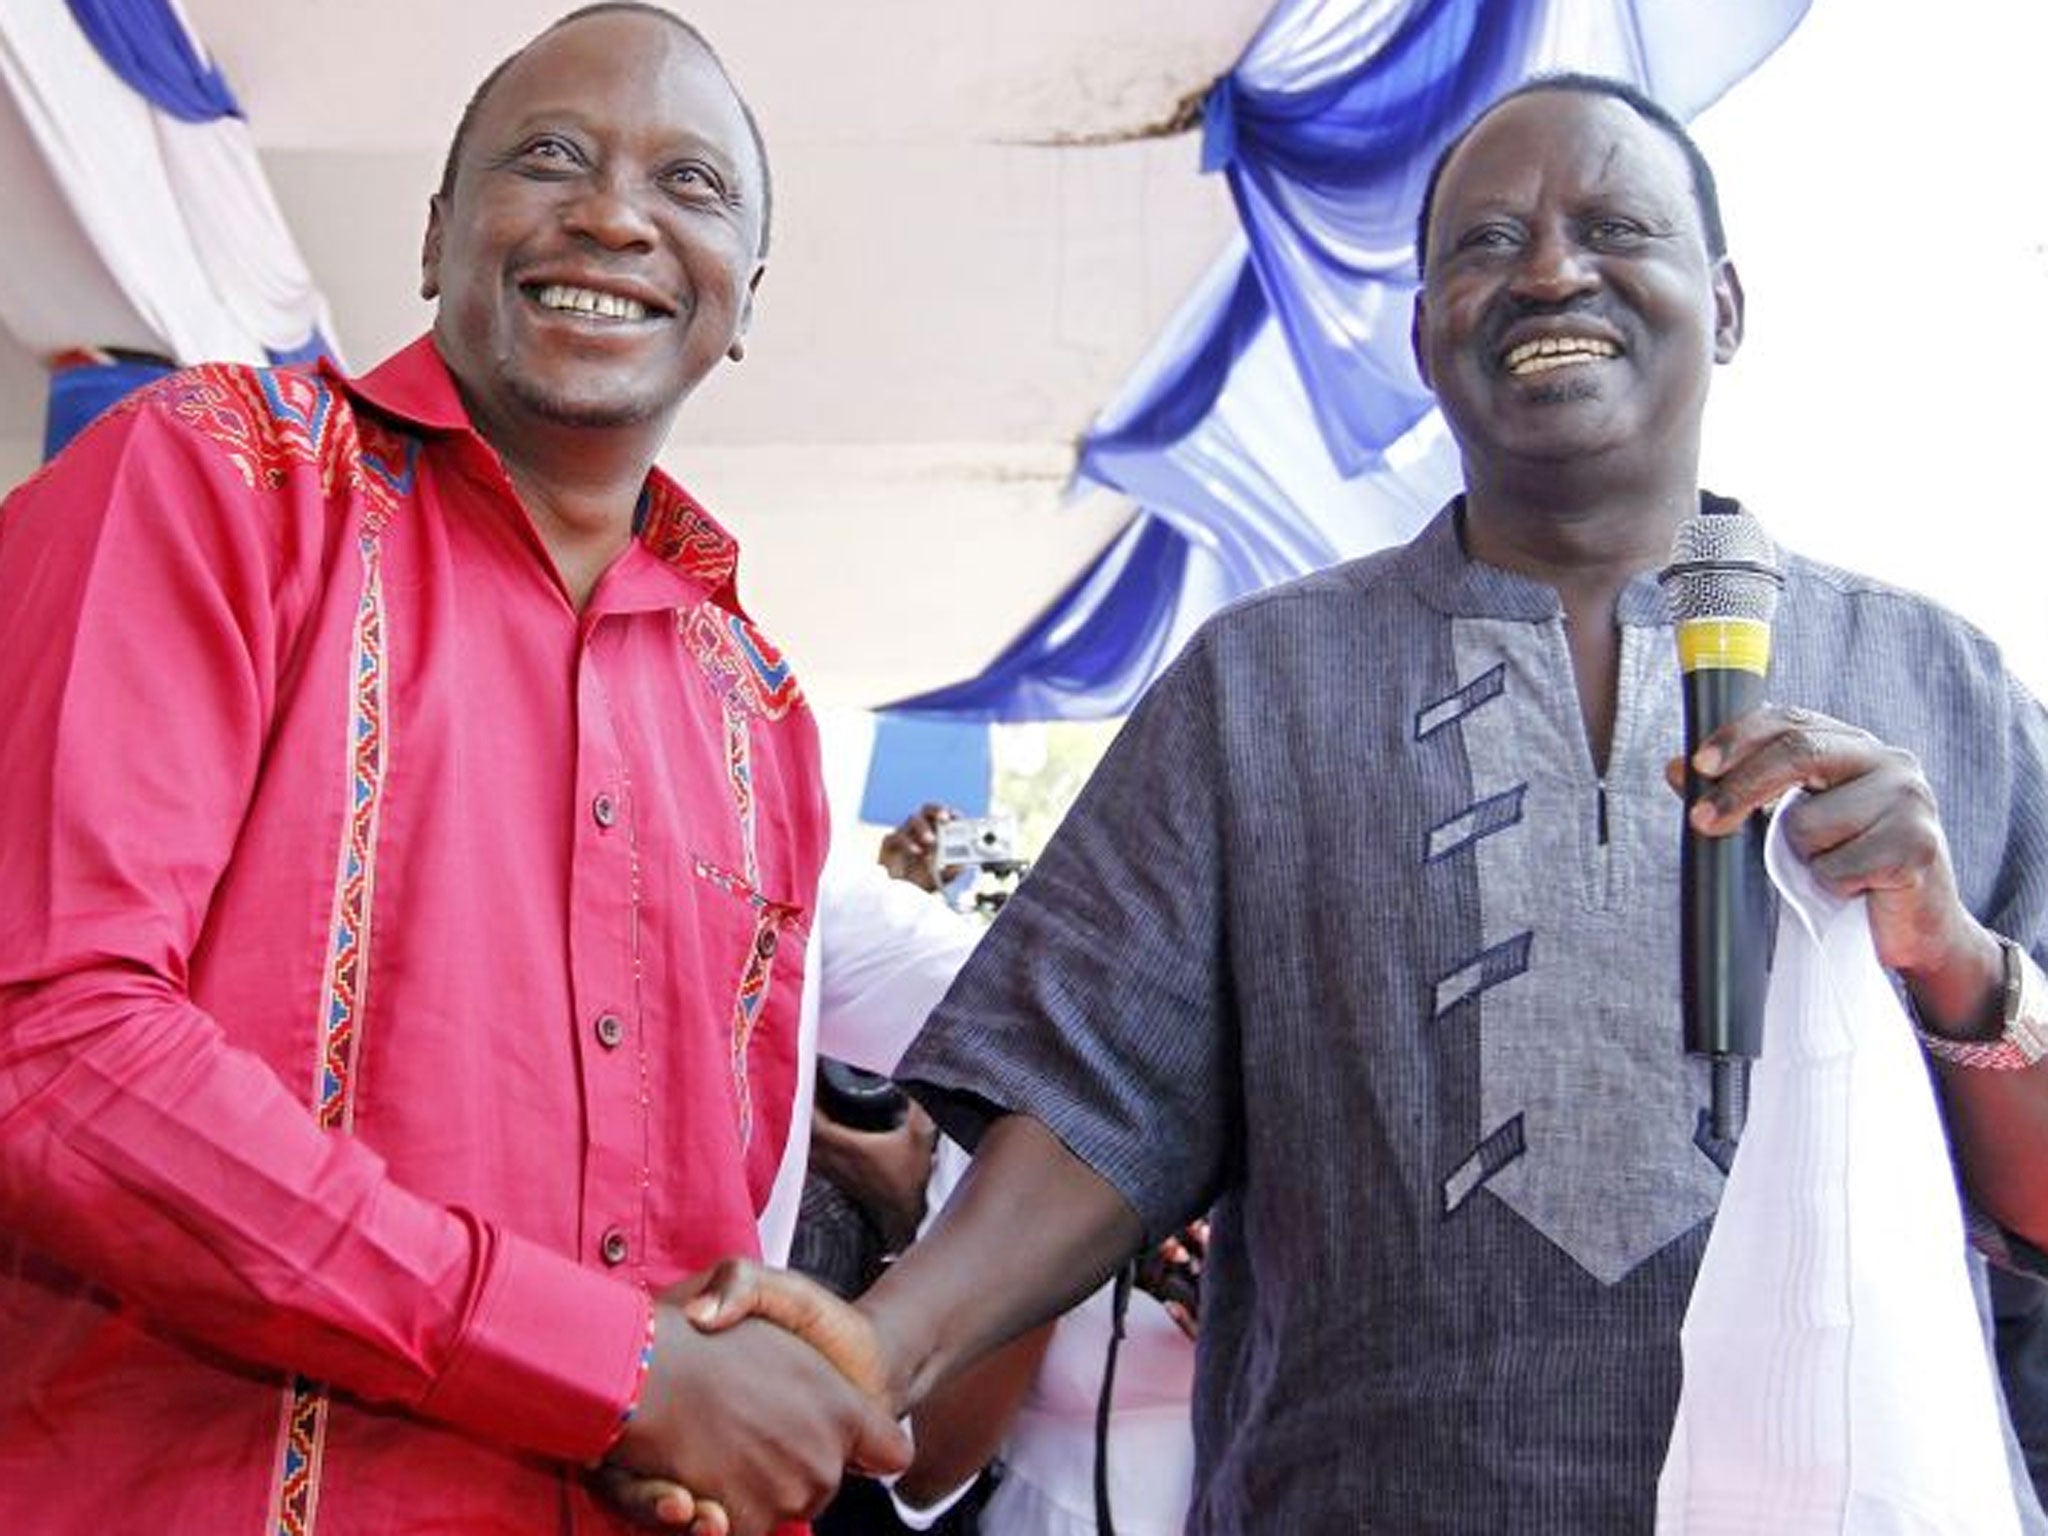 Current leader Raila Odinga, right, and Uhuru Kenyatta are neck and neck in the polls